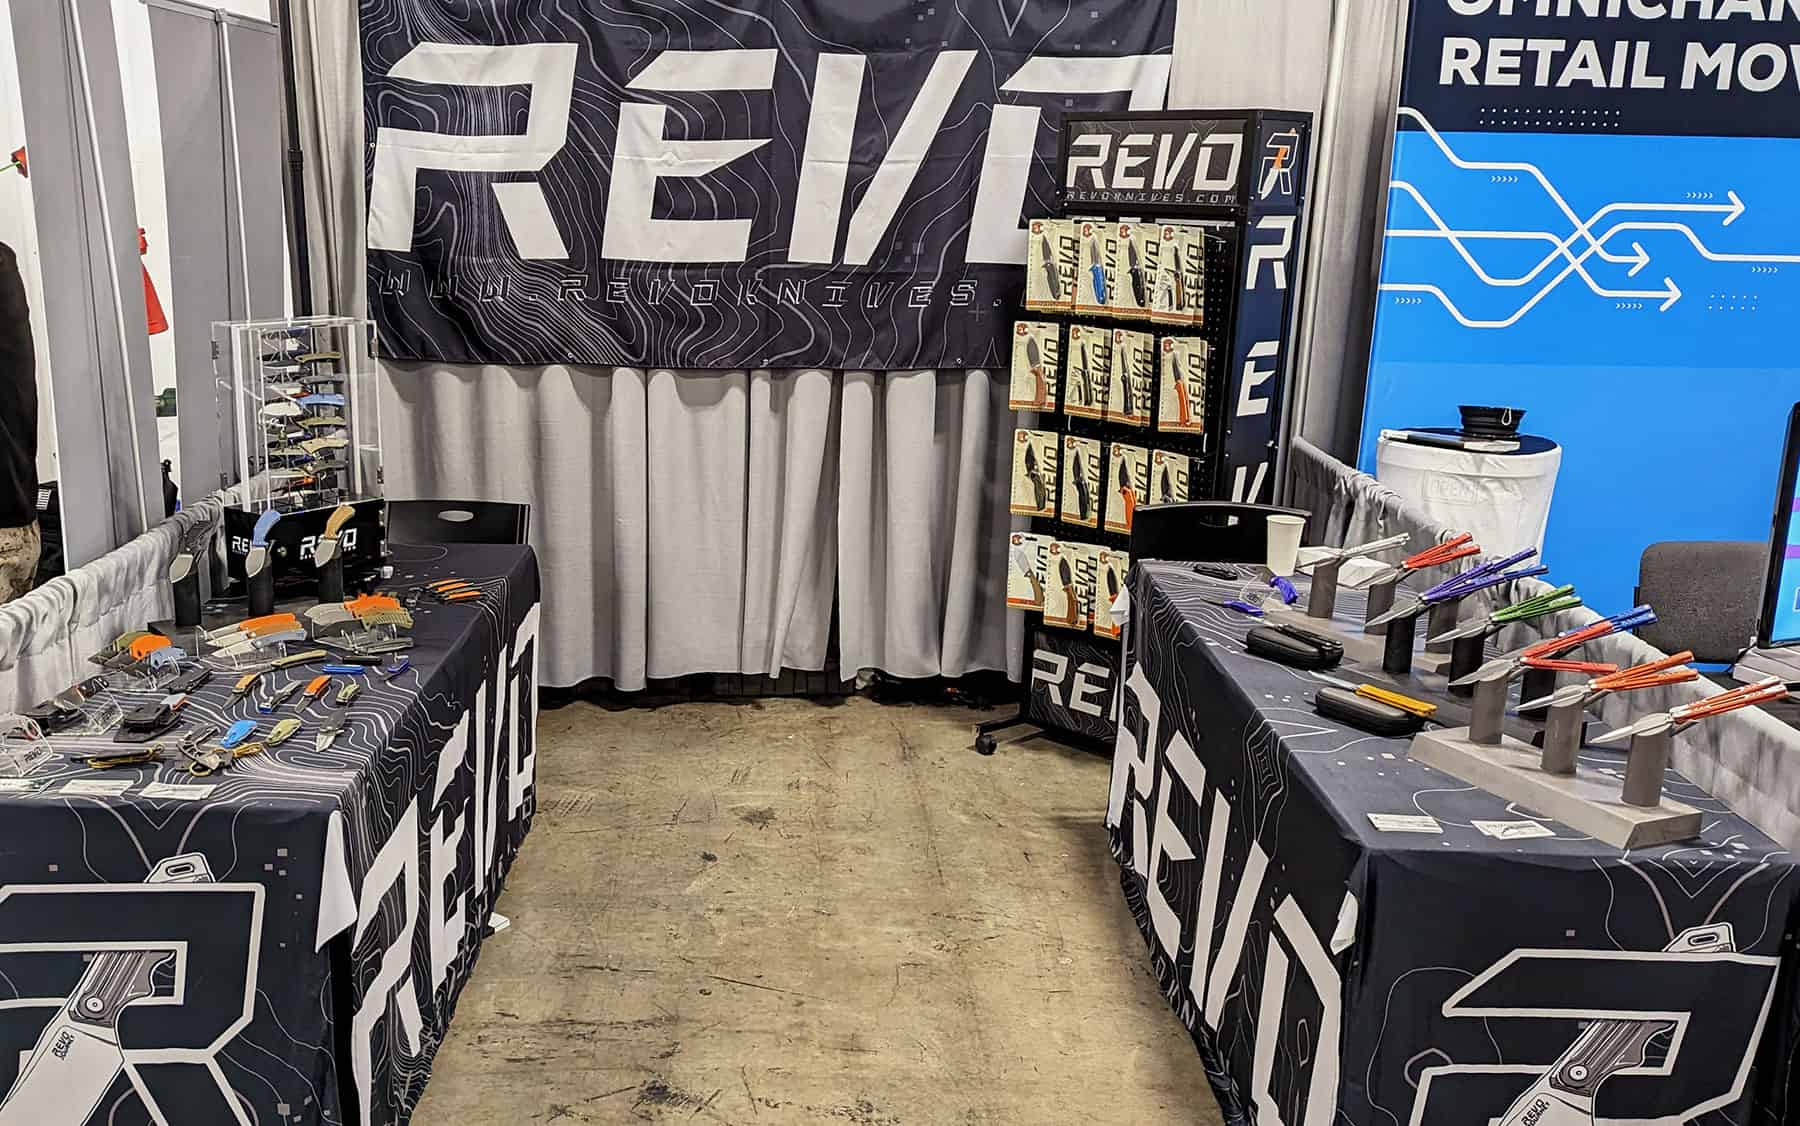 Revo Knives showed up to SHOT Show 2023 with some great new designs and new versions of established knives.